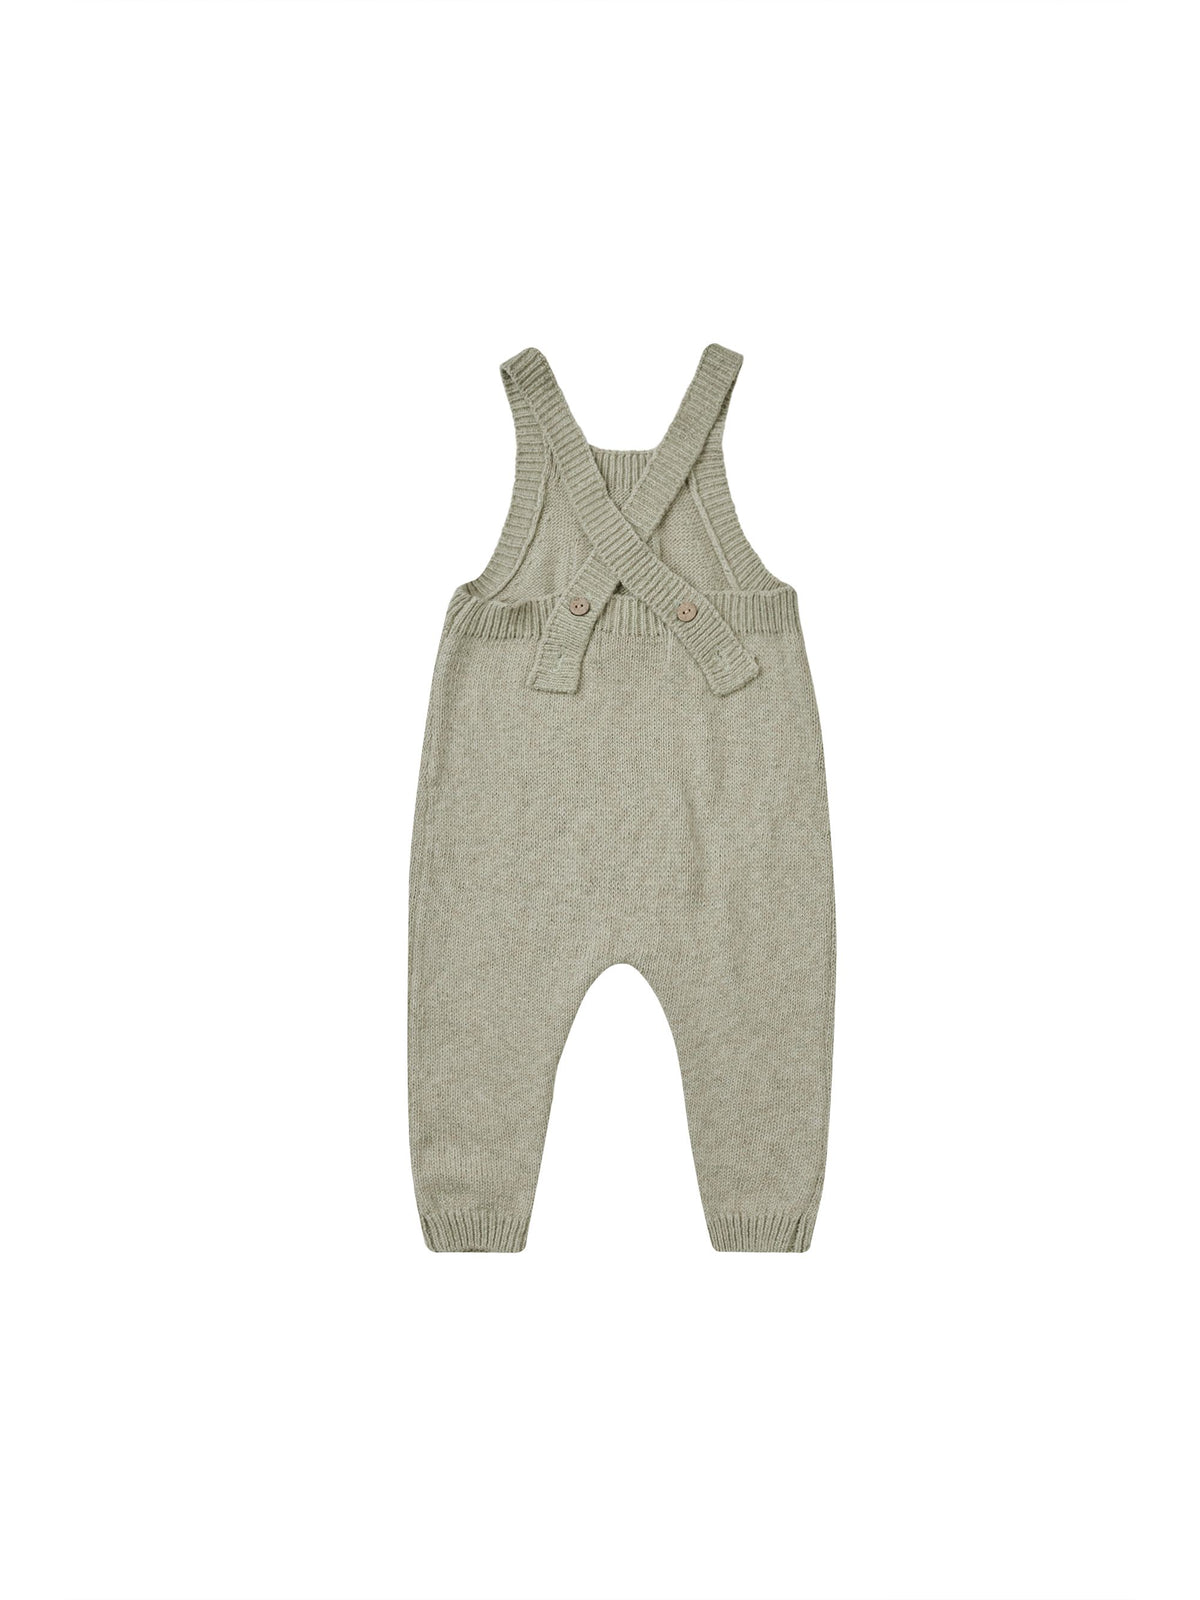 Sage Knit Overall